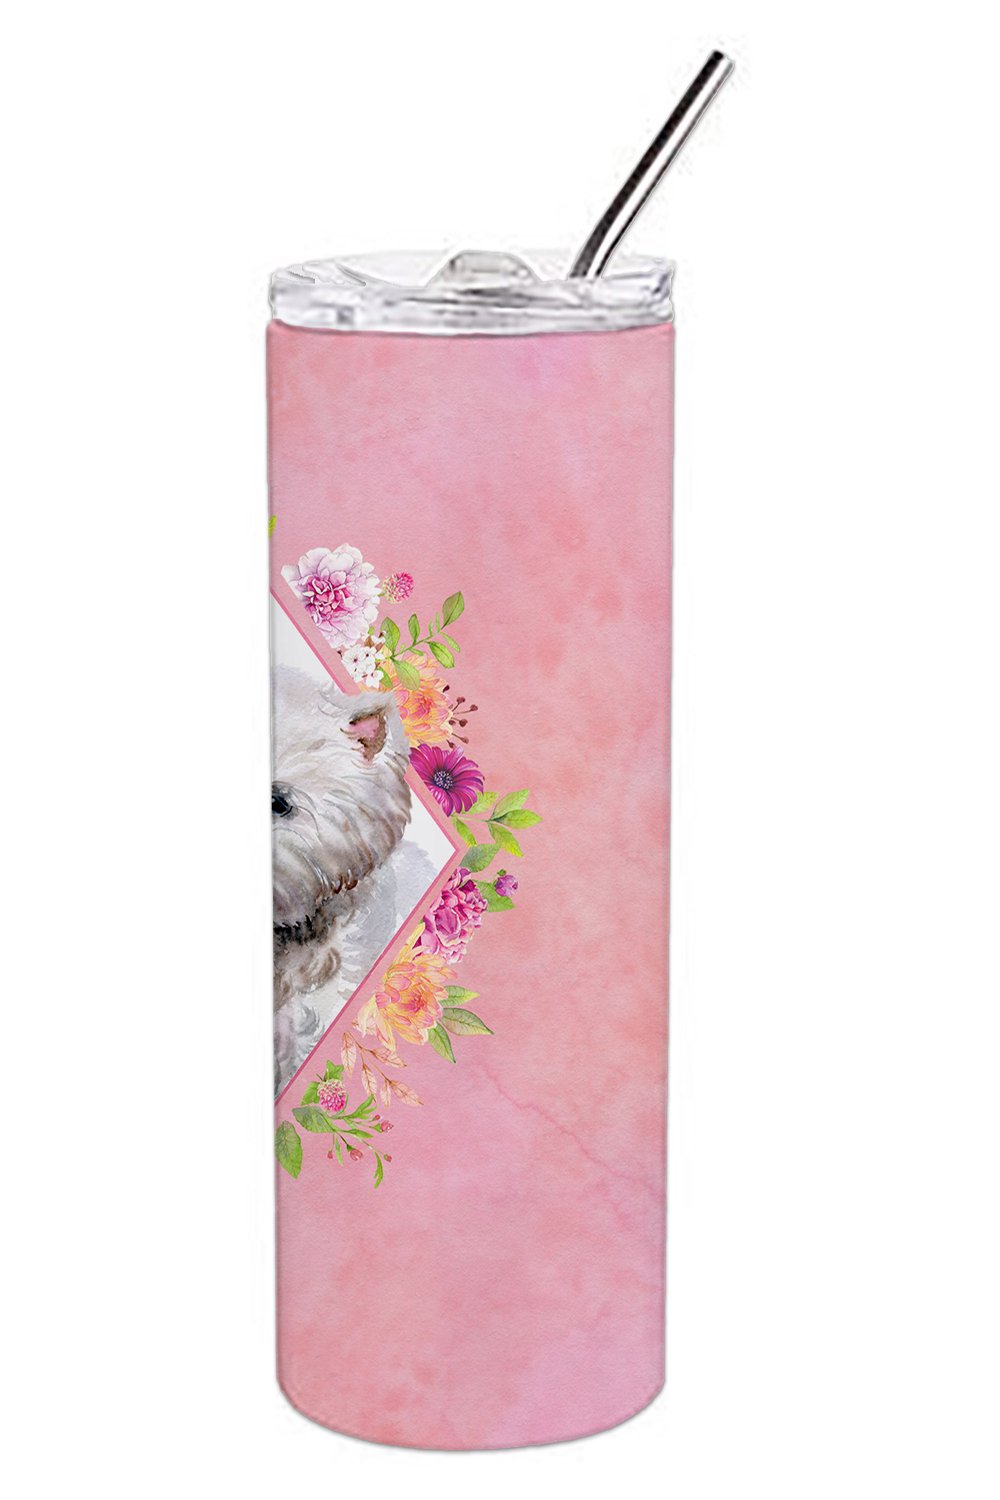 West Highland White Terrier Pink Flowers Double Walled Stainless Steel 20 oz Skinny Tumbler CK4193TBL20 by Caroline's Treasures